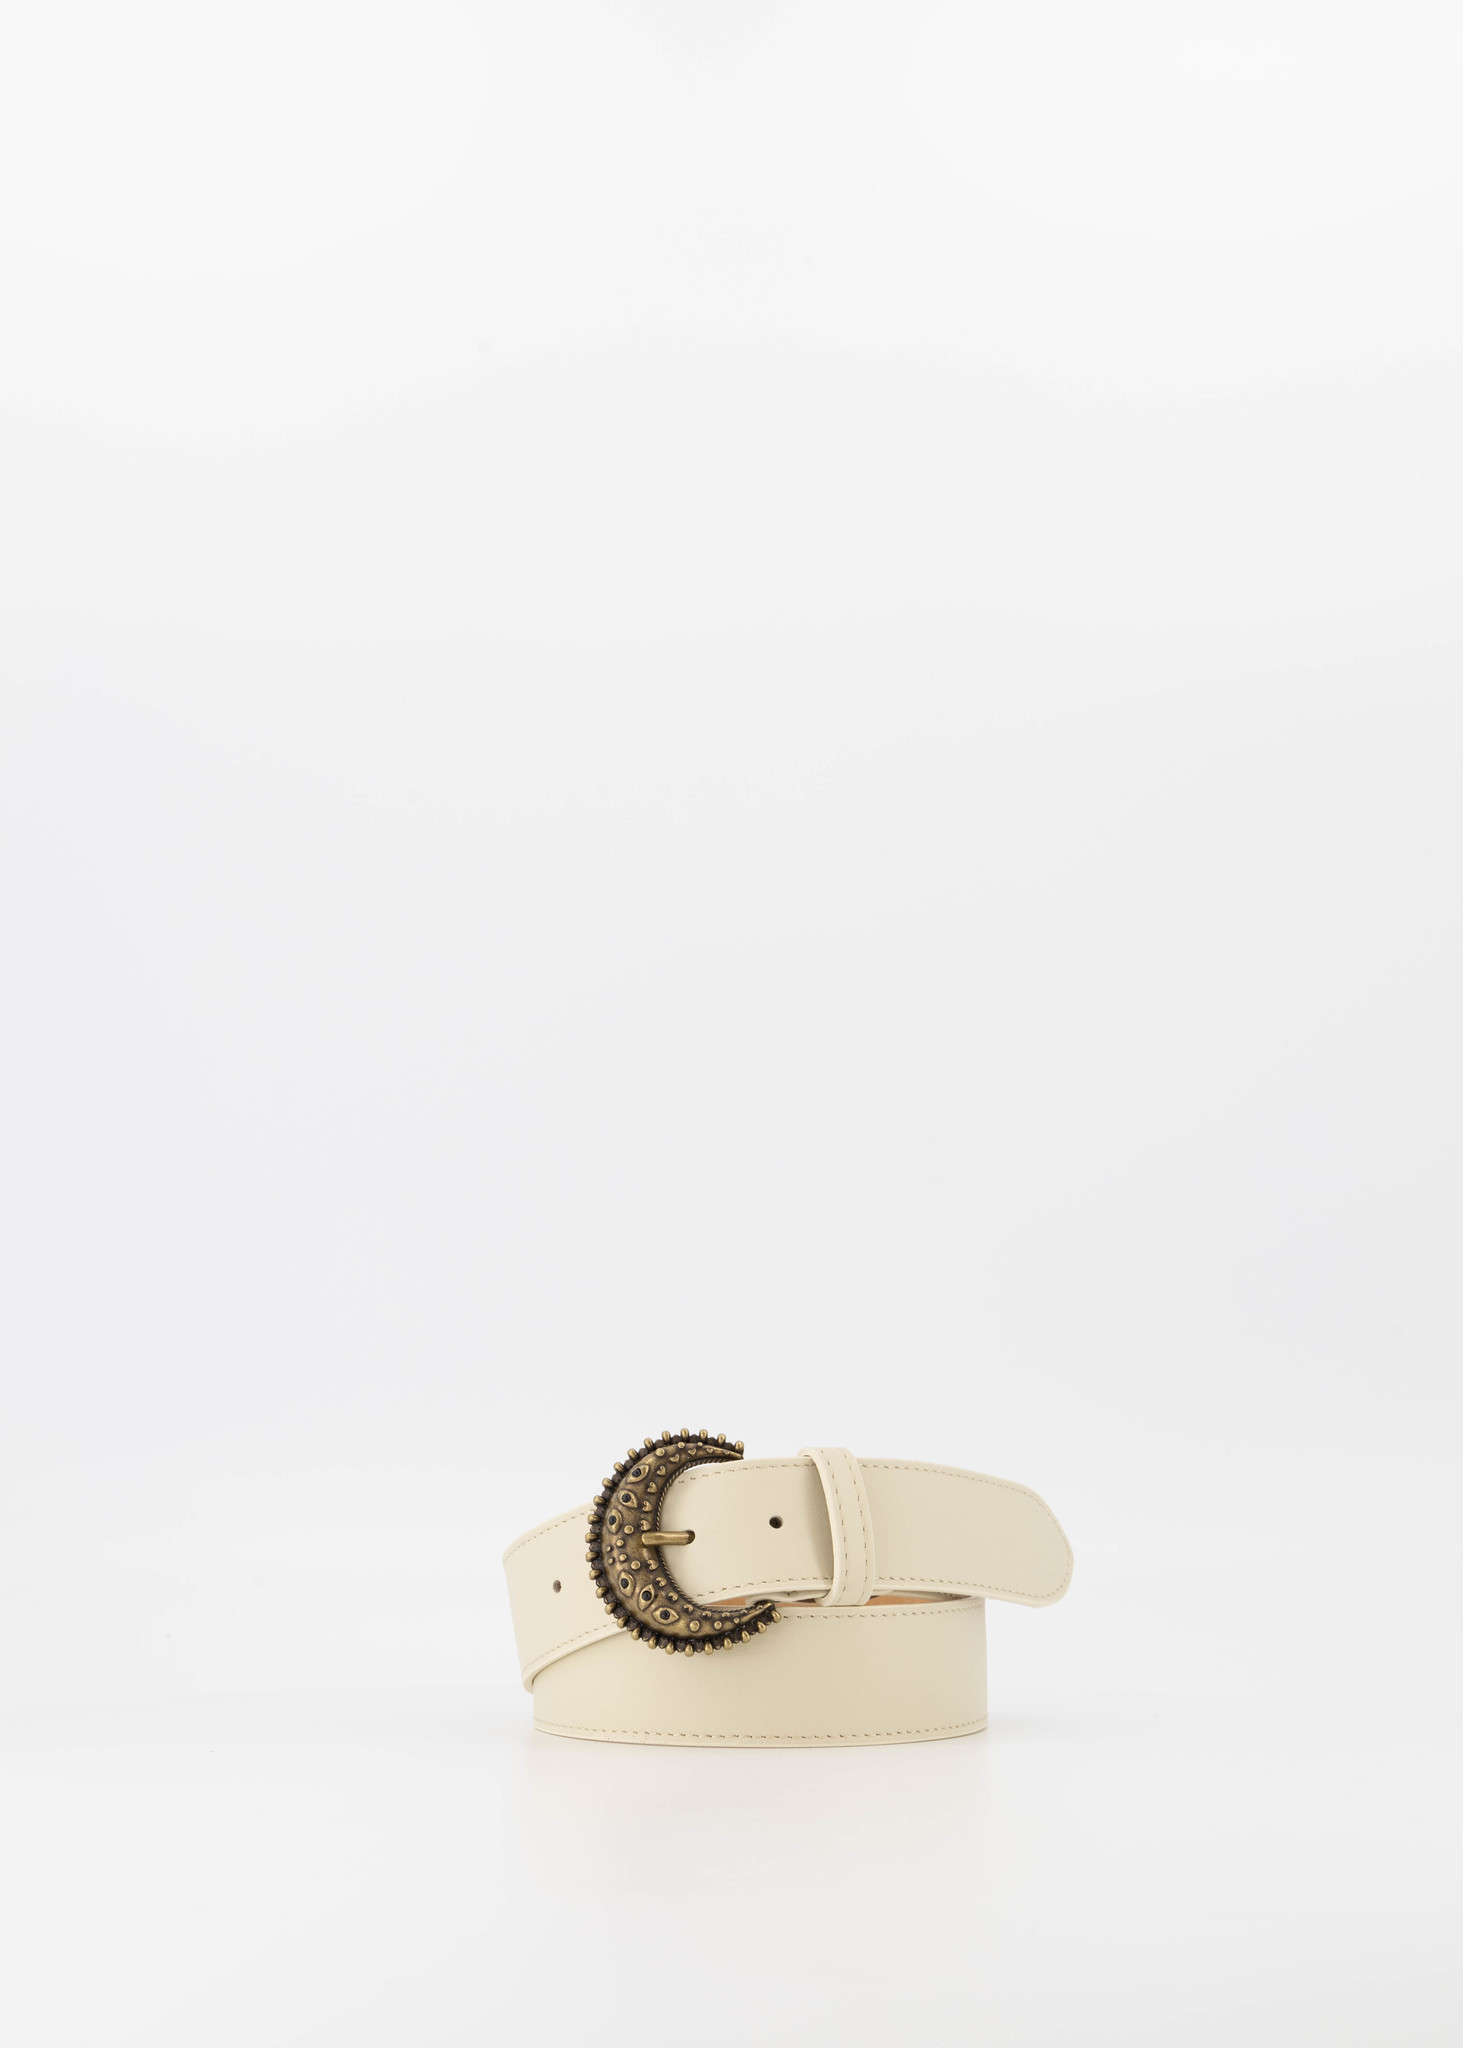 Belts with buckles | Esmeralda - Sauvage - Belts with buckles - Beige ...